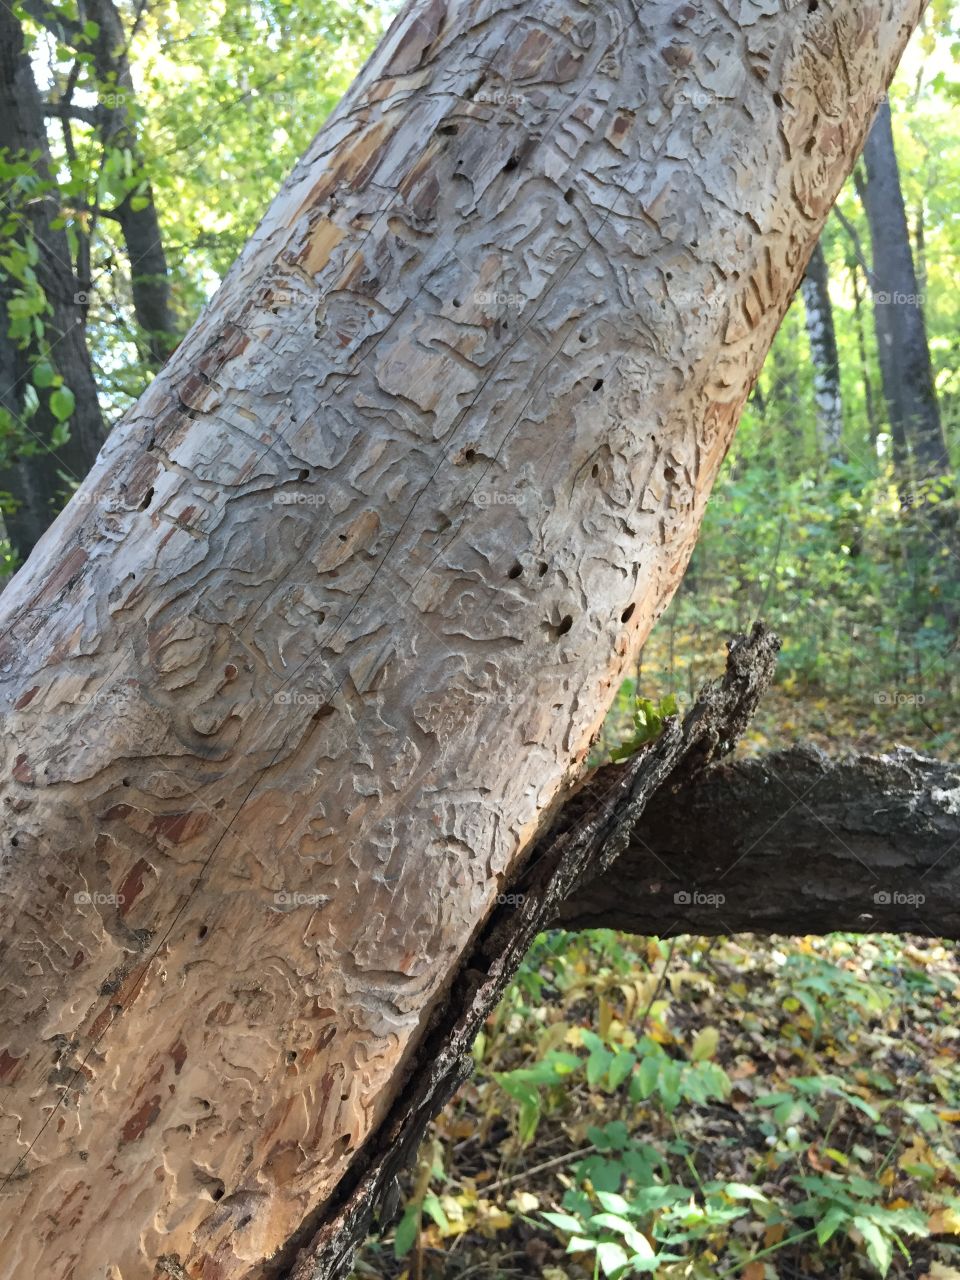 bark beetle causes great harm to trees in the forest